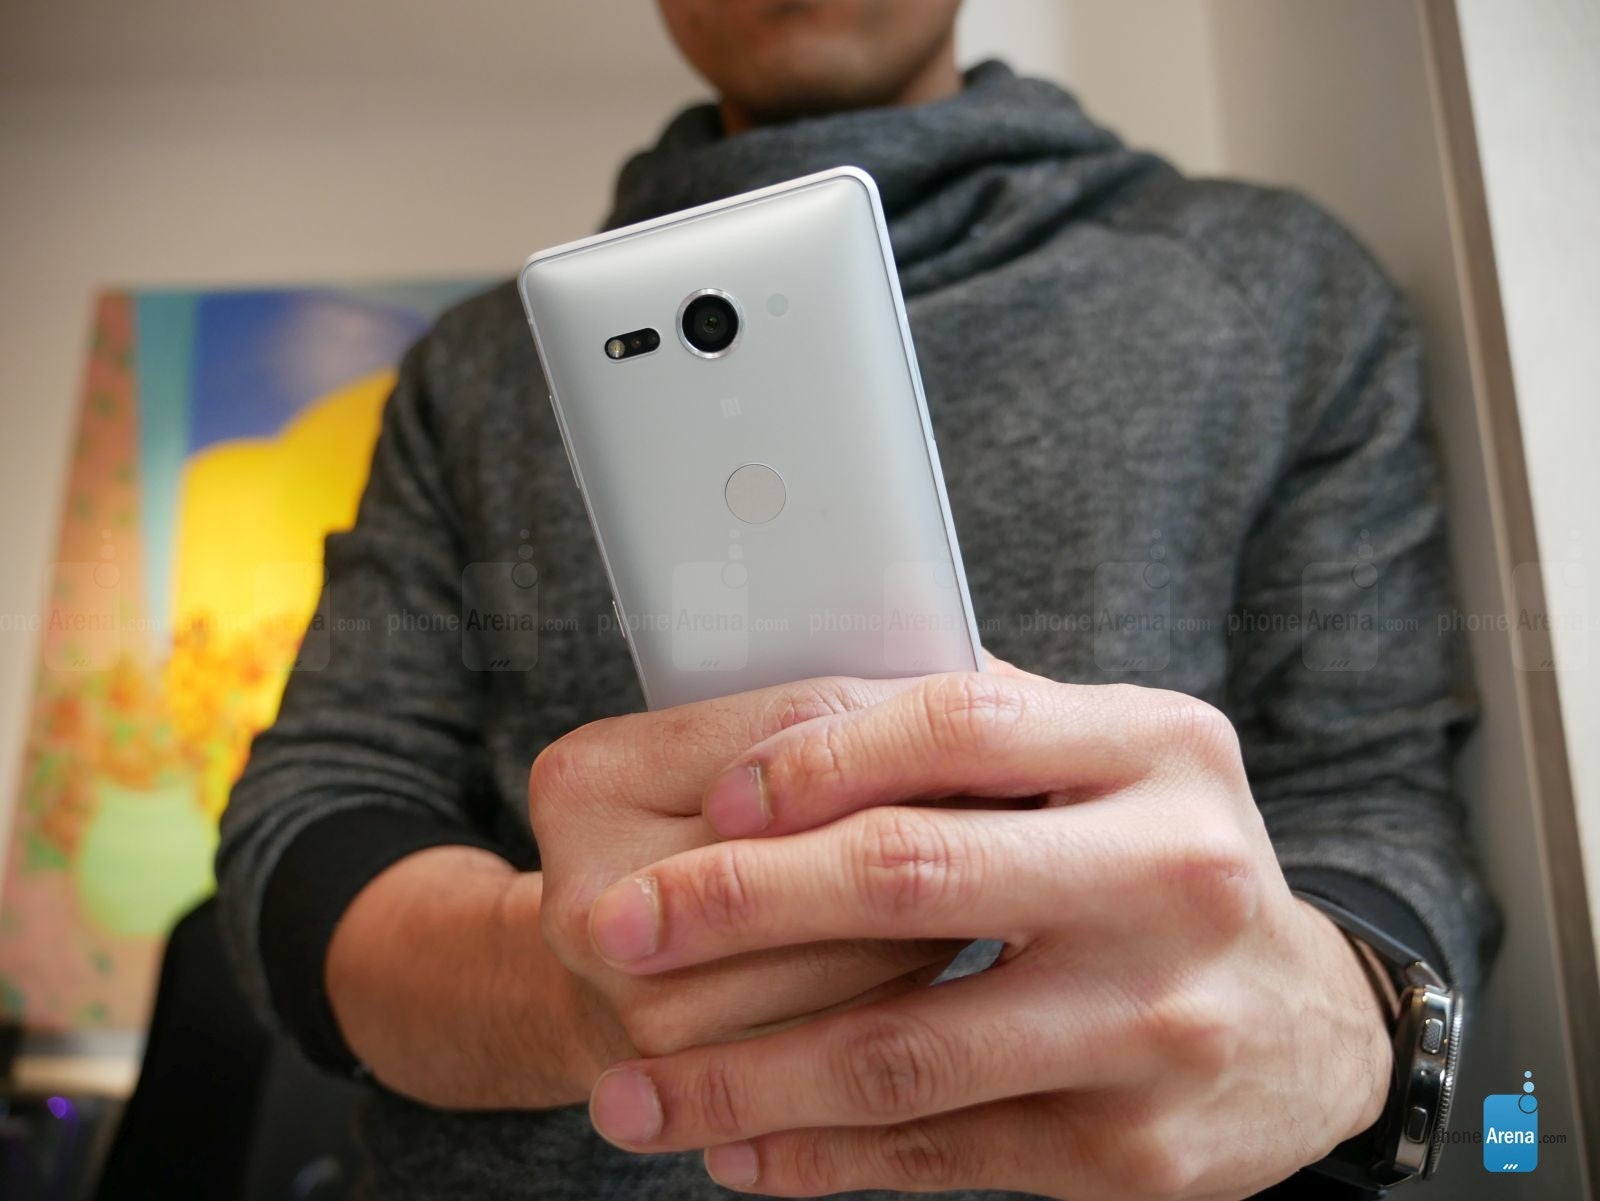 Sony Xperia XZ2 Compact hands-on